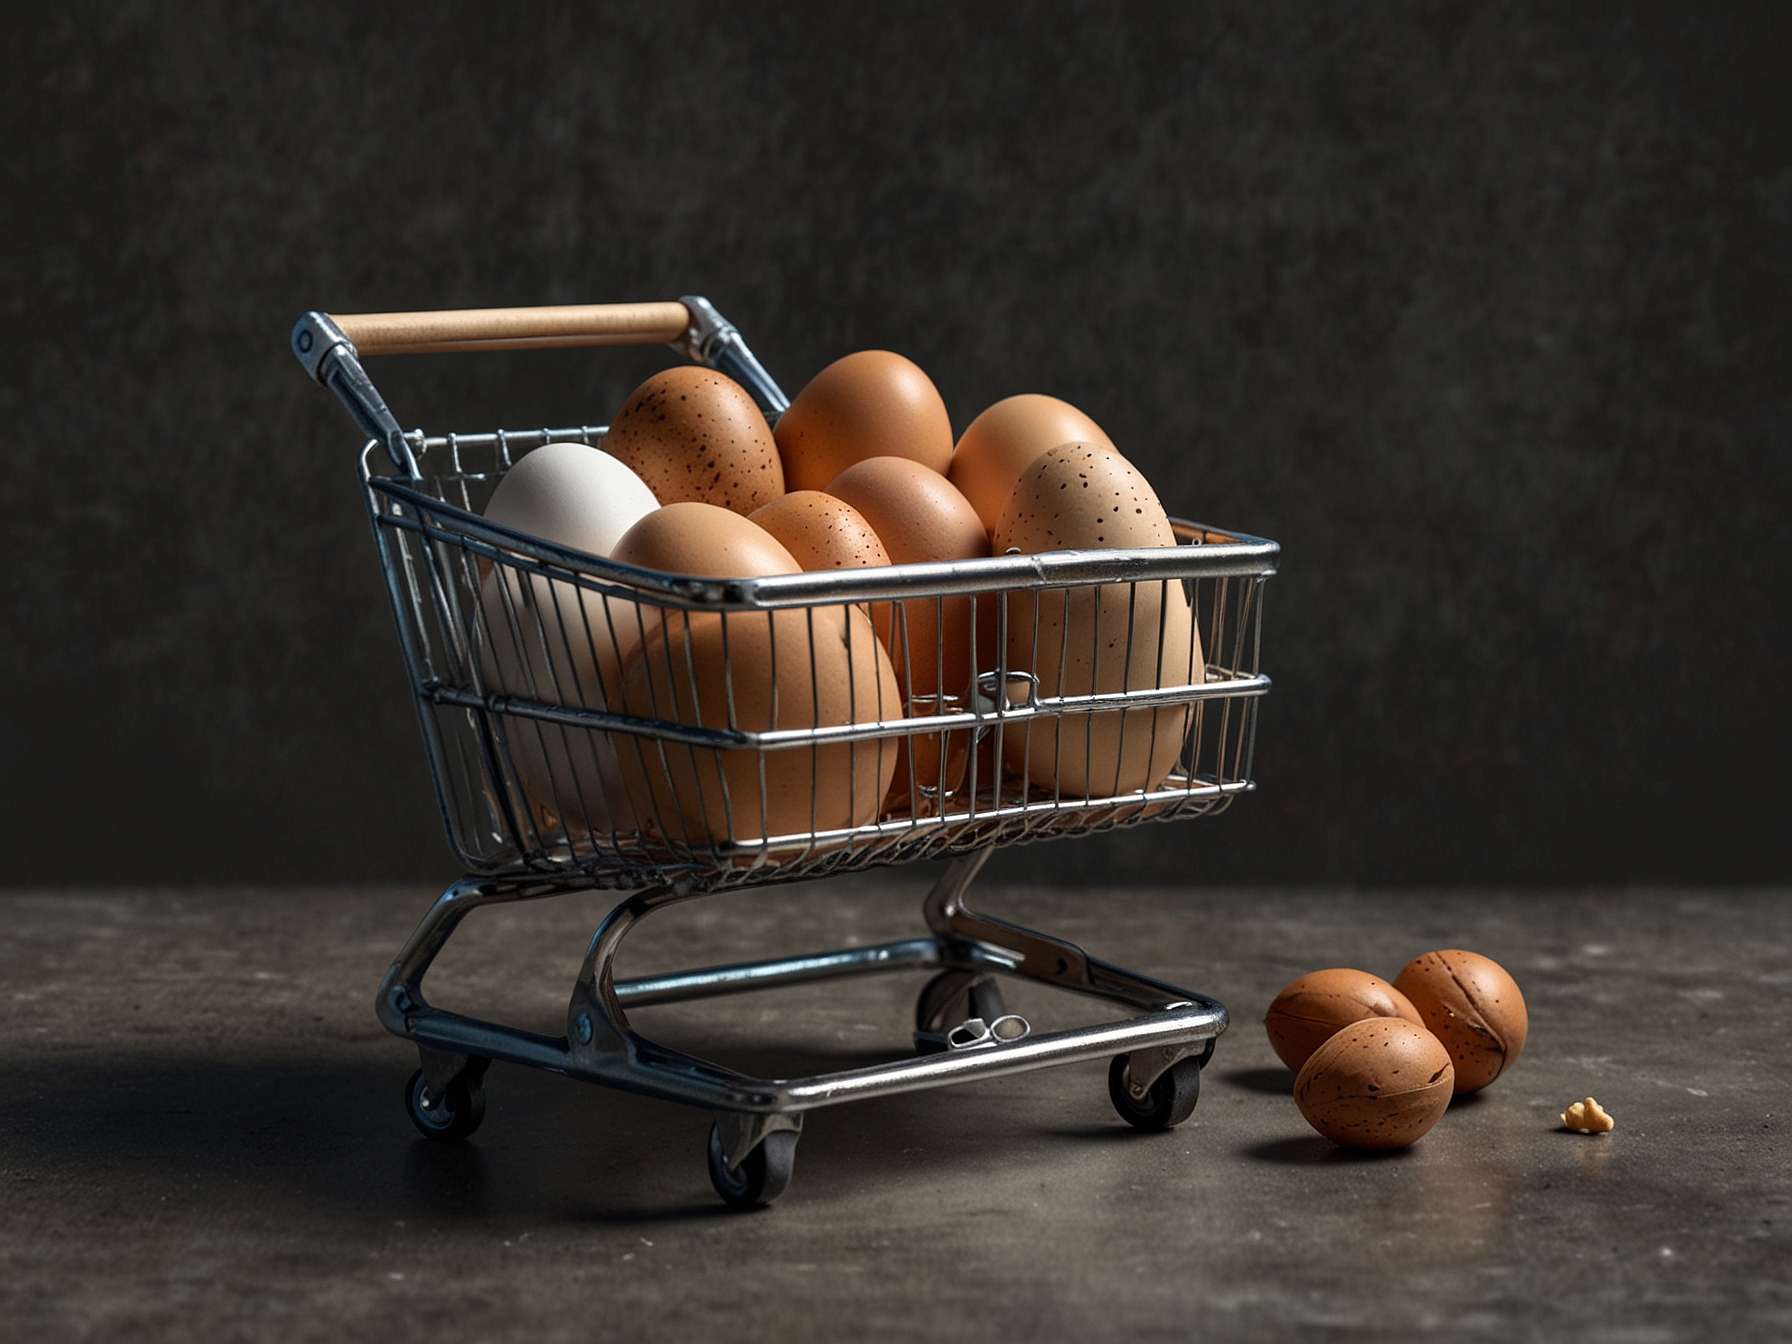 A shopping cart filled with organic eggs and Kirkland Signature's mixed nuts, highlighting the significant price jumps these essential items have seen, affecting household budgets.